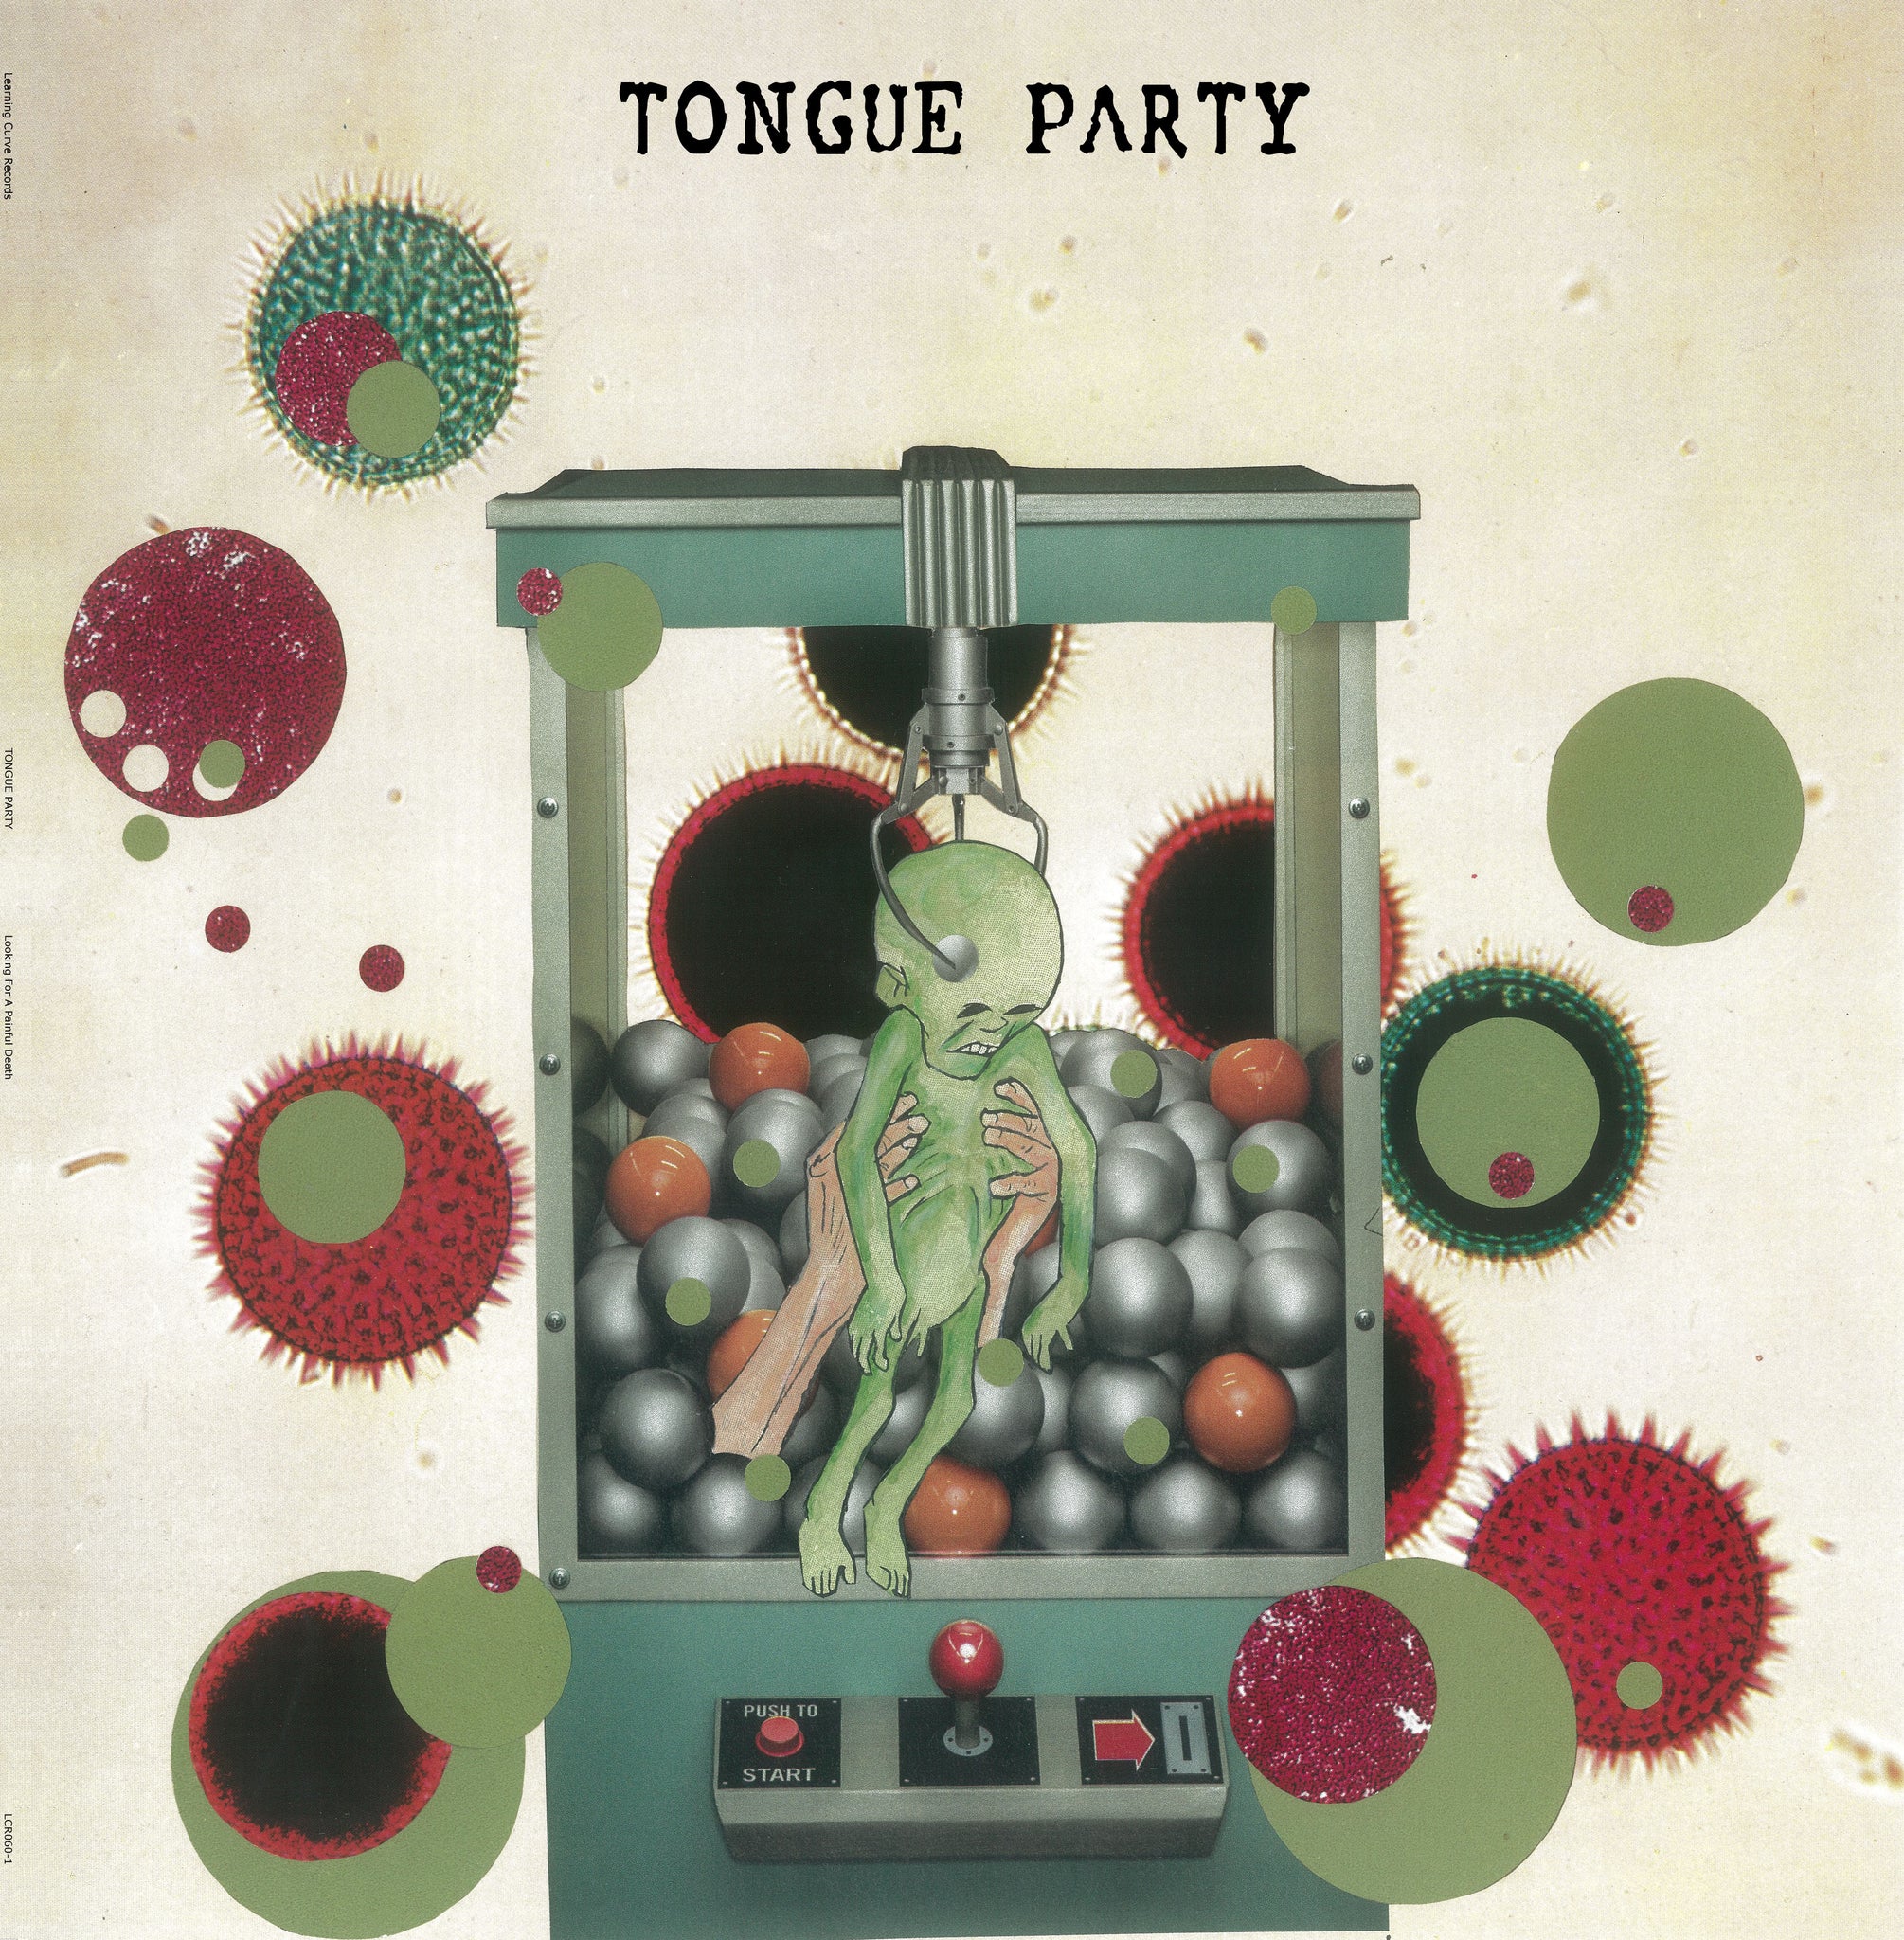 Tongue Party "Looking For a Painful Death"